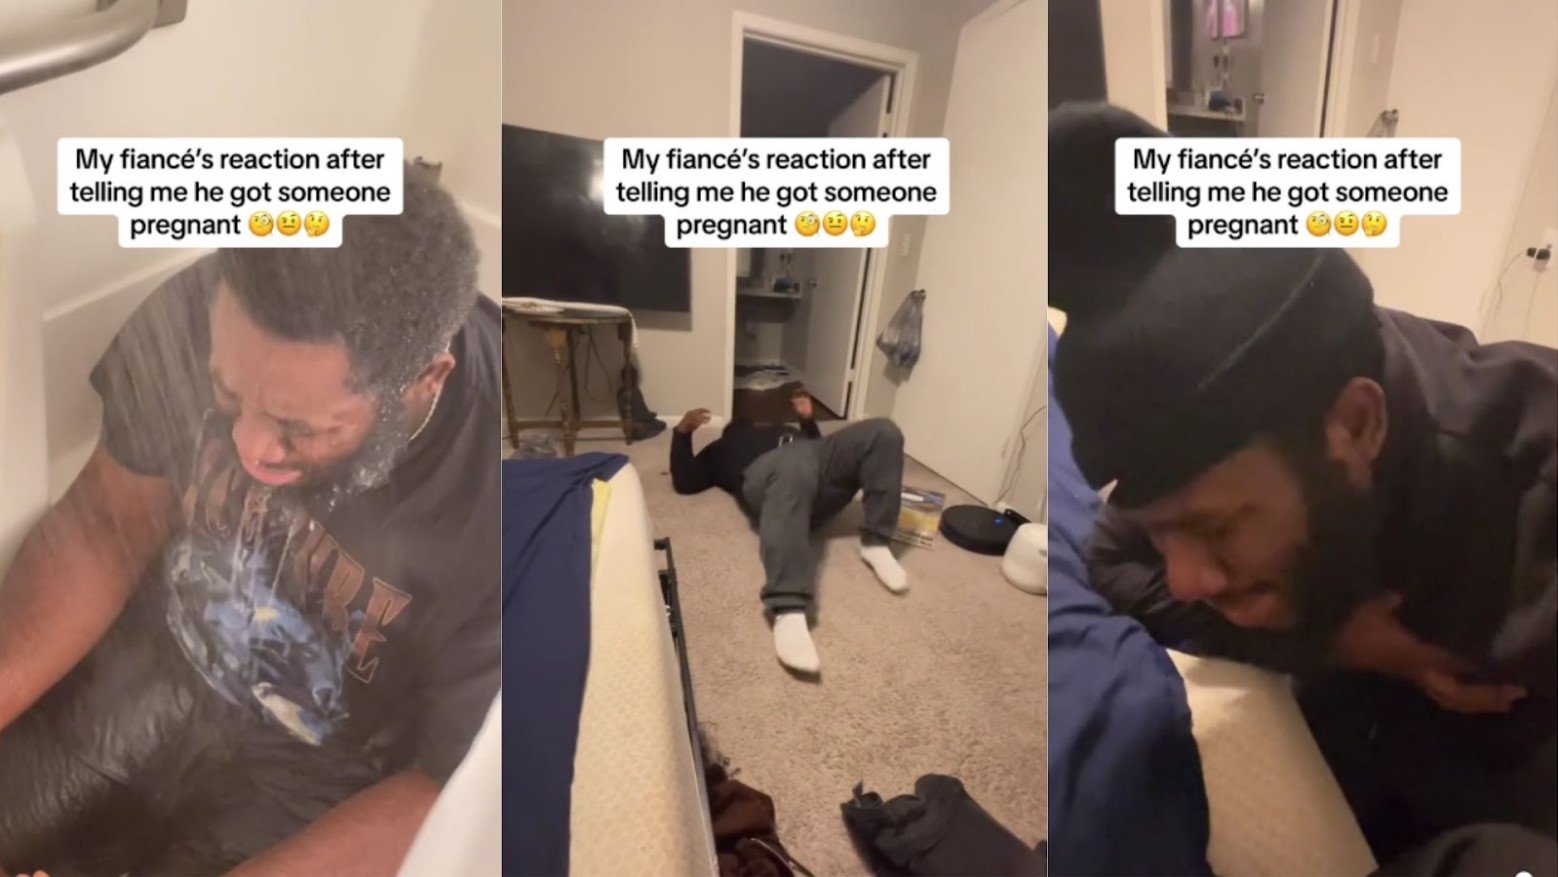 Three screenshots from a TikTok video by @royalandwavey of a man crying with the text “My fiance’s reaction after telling me he got someone pregnant”